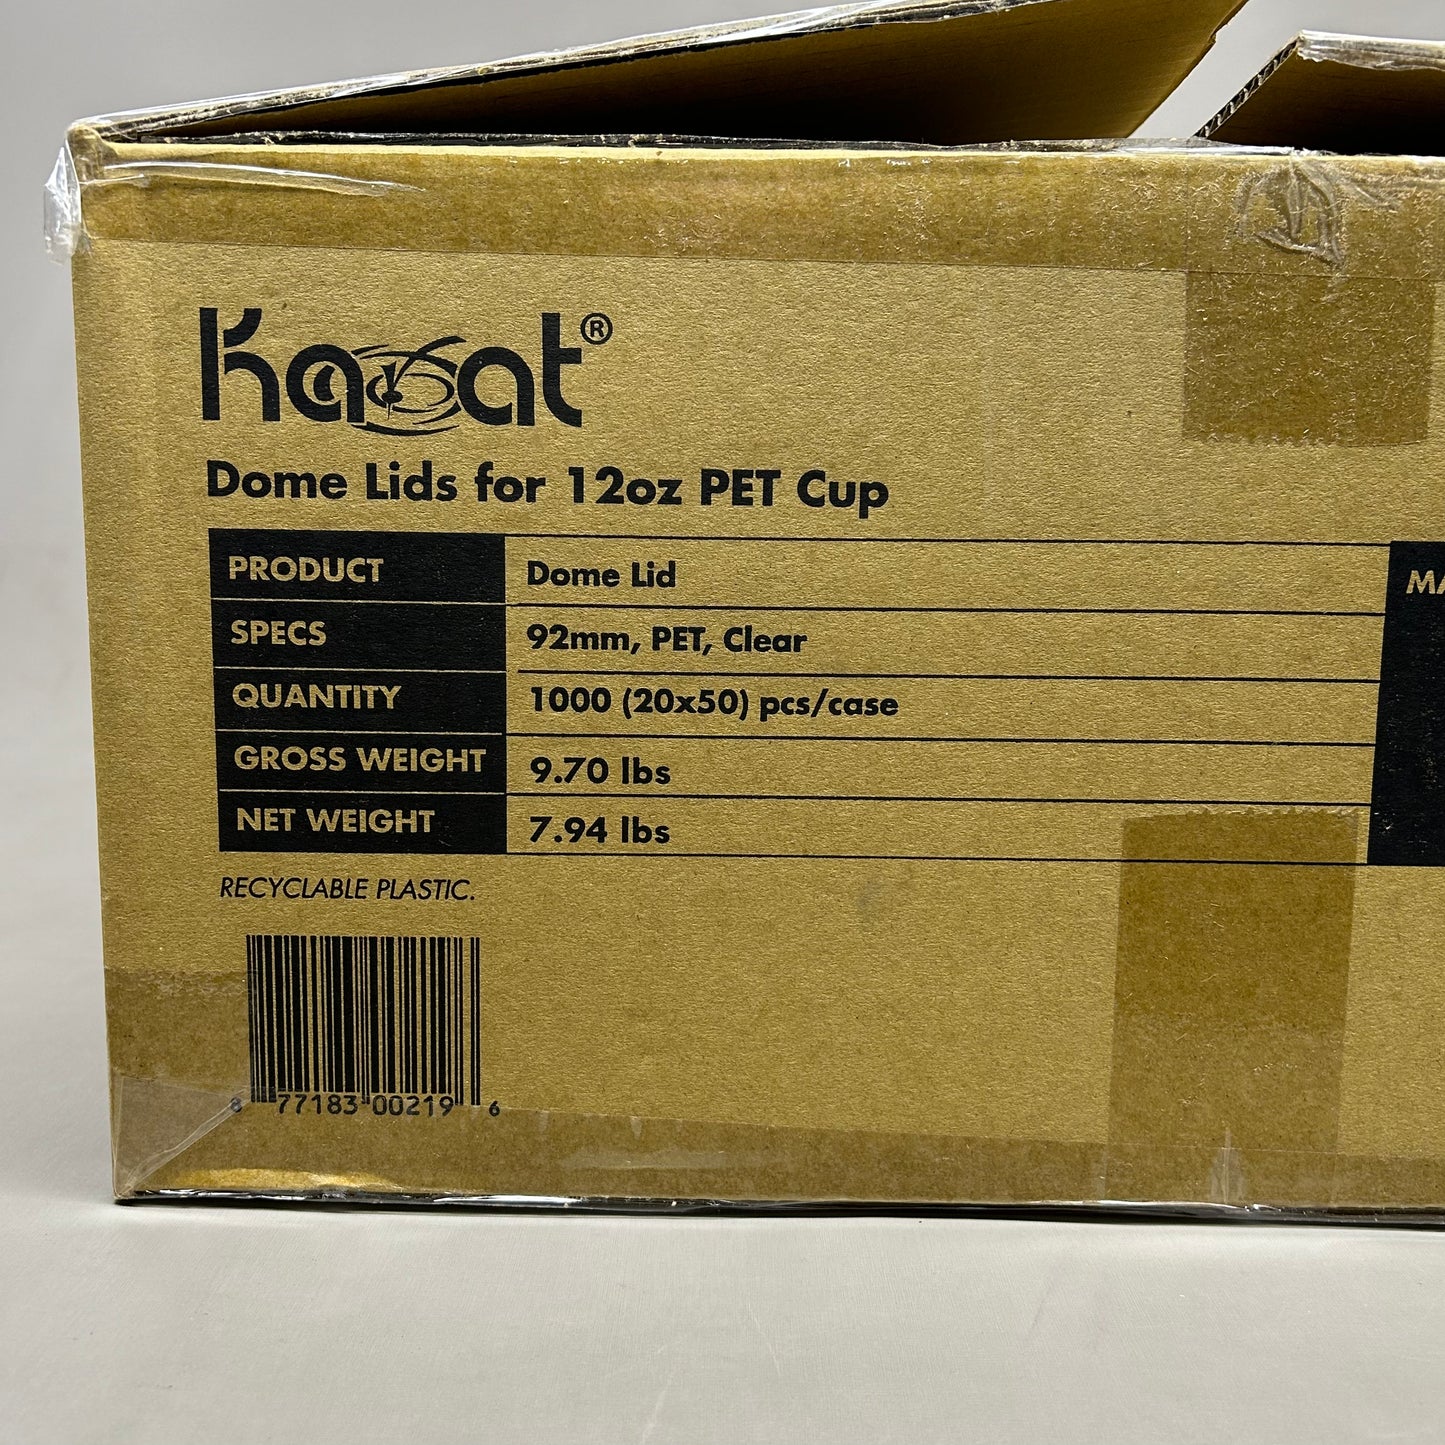 ZA@ KARAT Dome Lids for 12 oz PET Cup 92 mm Recyclable Plastic Clear 1000 ct (New)